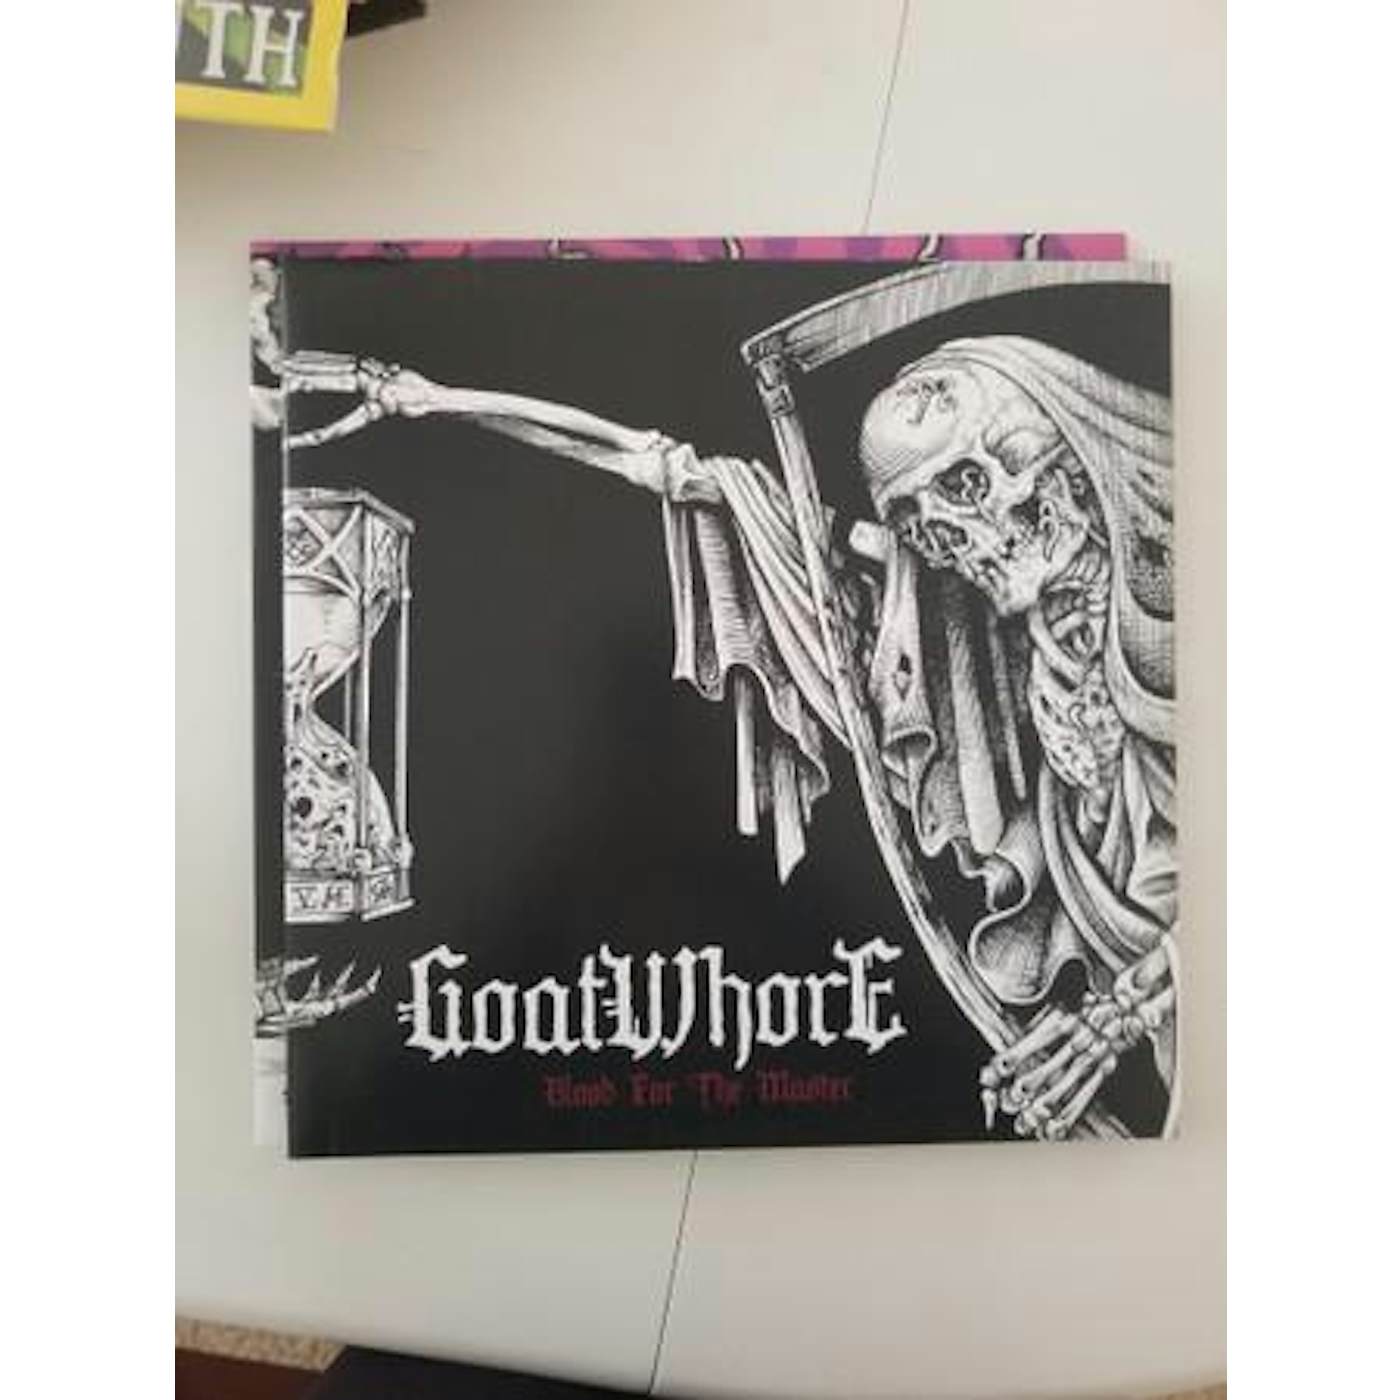 Goatwhore Blood for the Master Vinyl Record